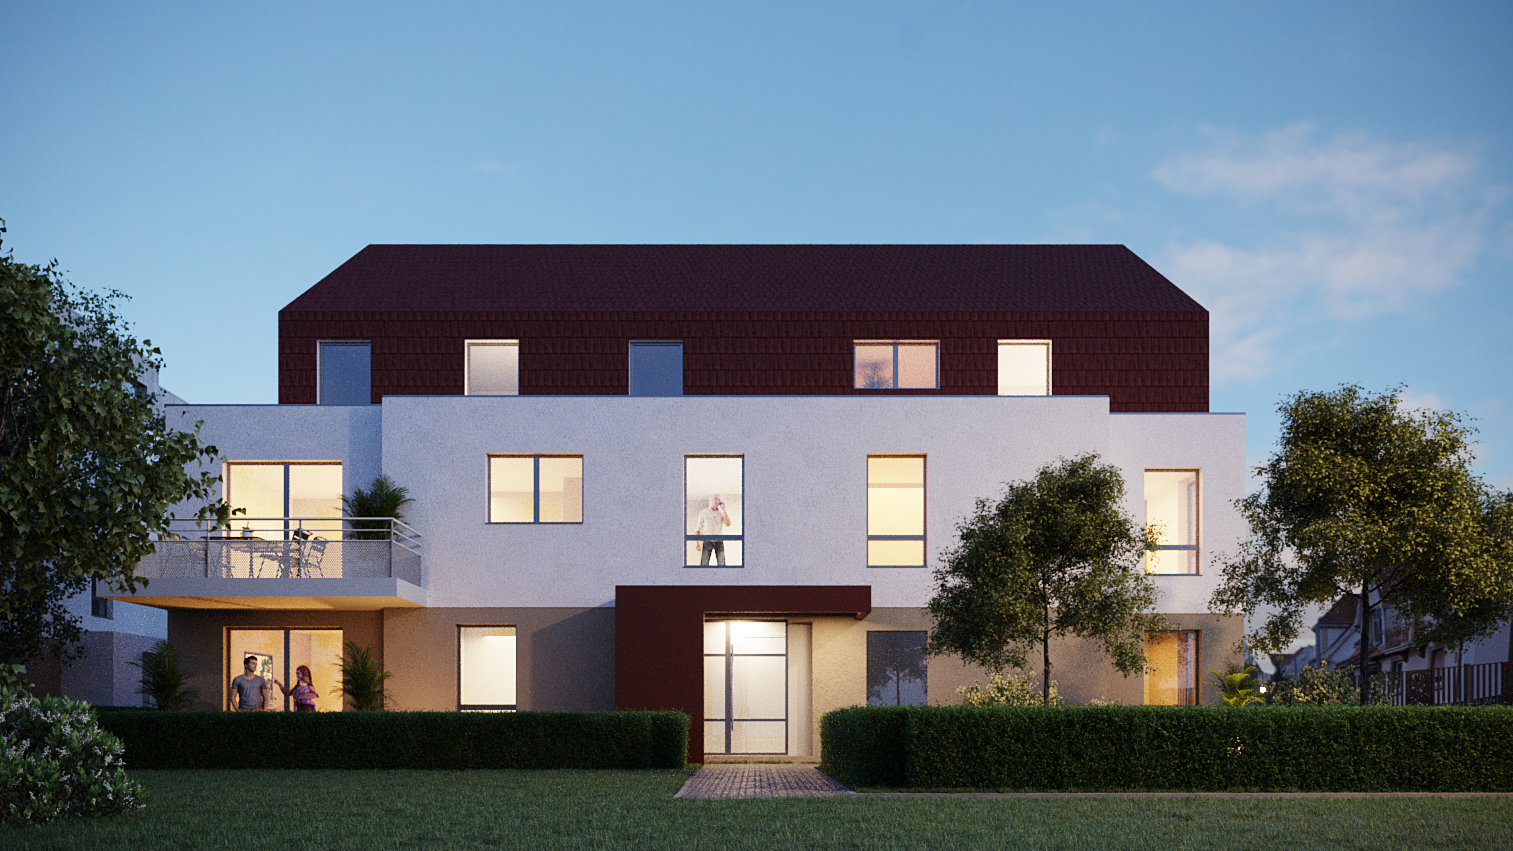 Programme immobilier neuf RESIDENCE LE 9 